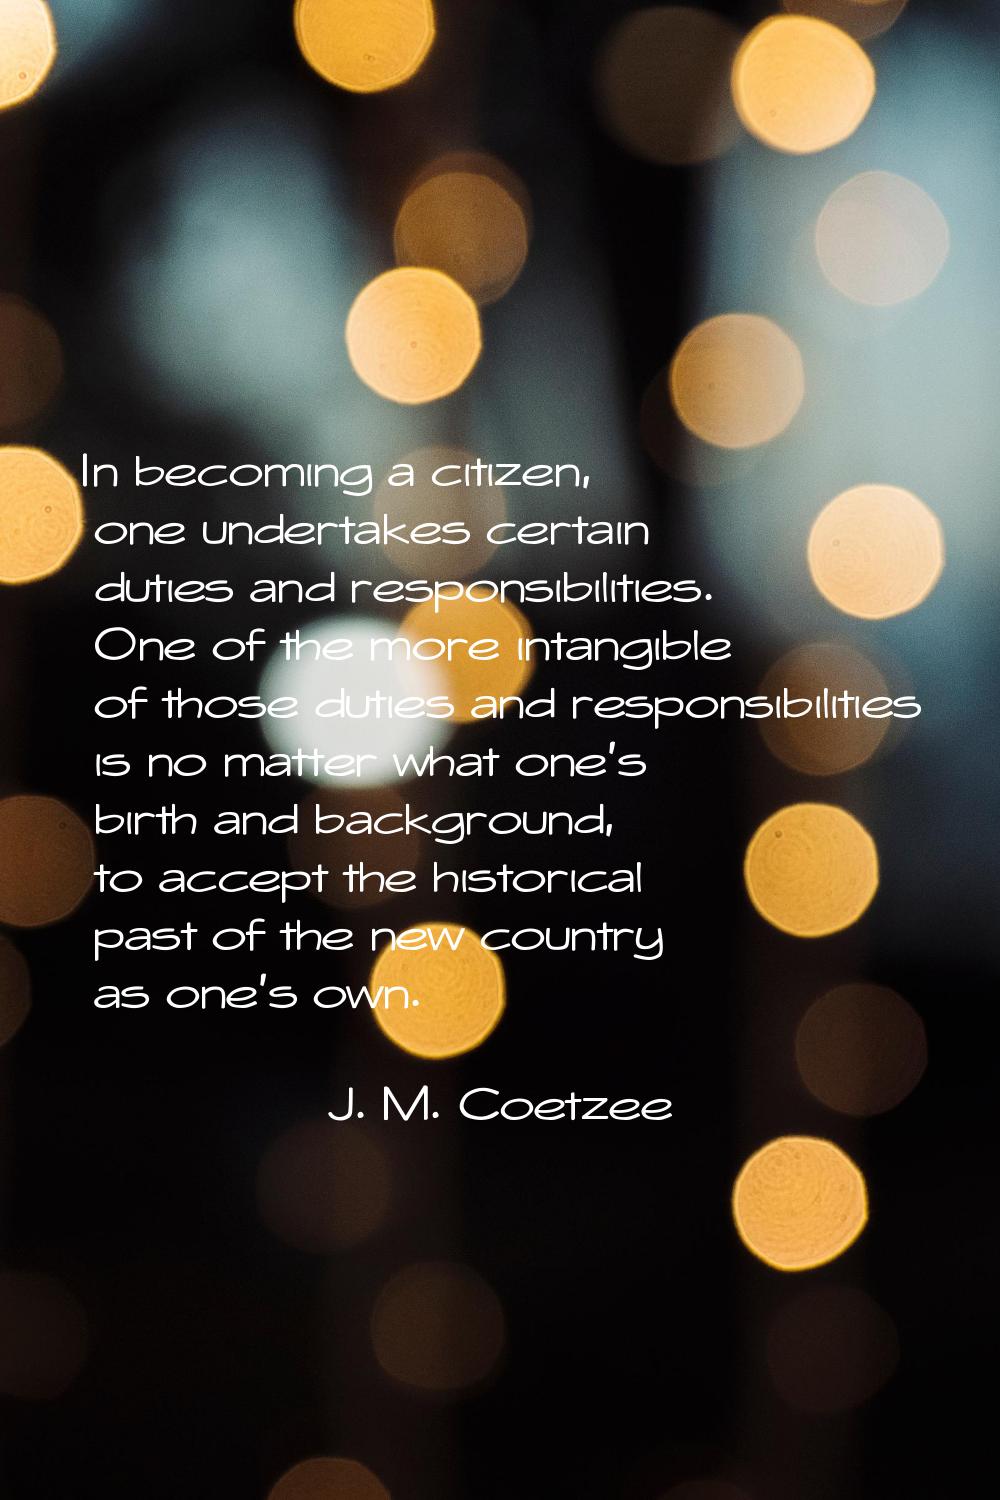 In becoming a citizen, one undertakes certain duties and responsibilities. One of the more intangib